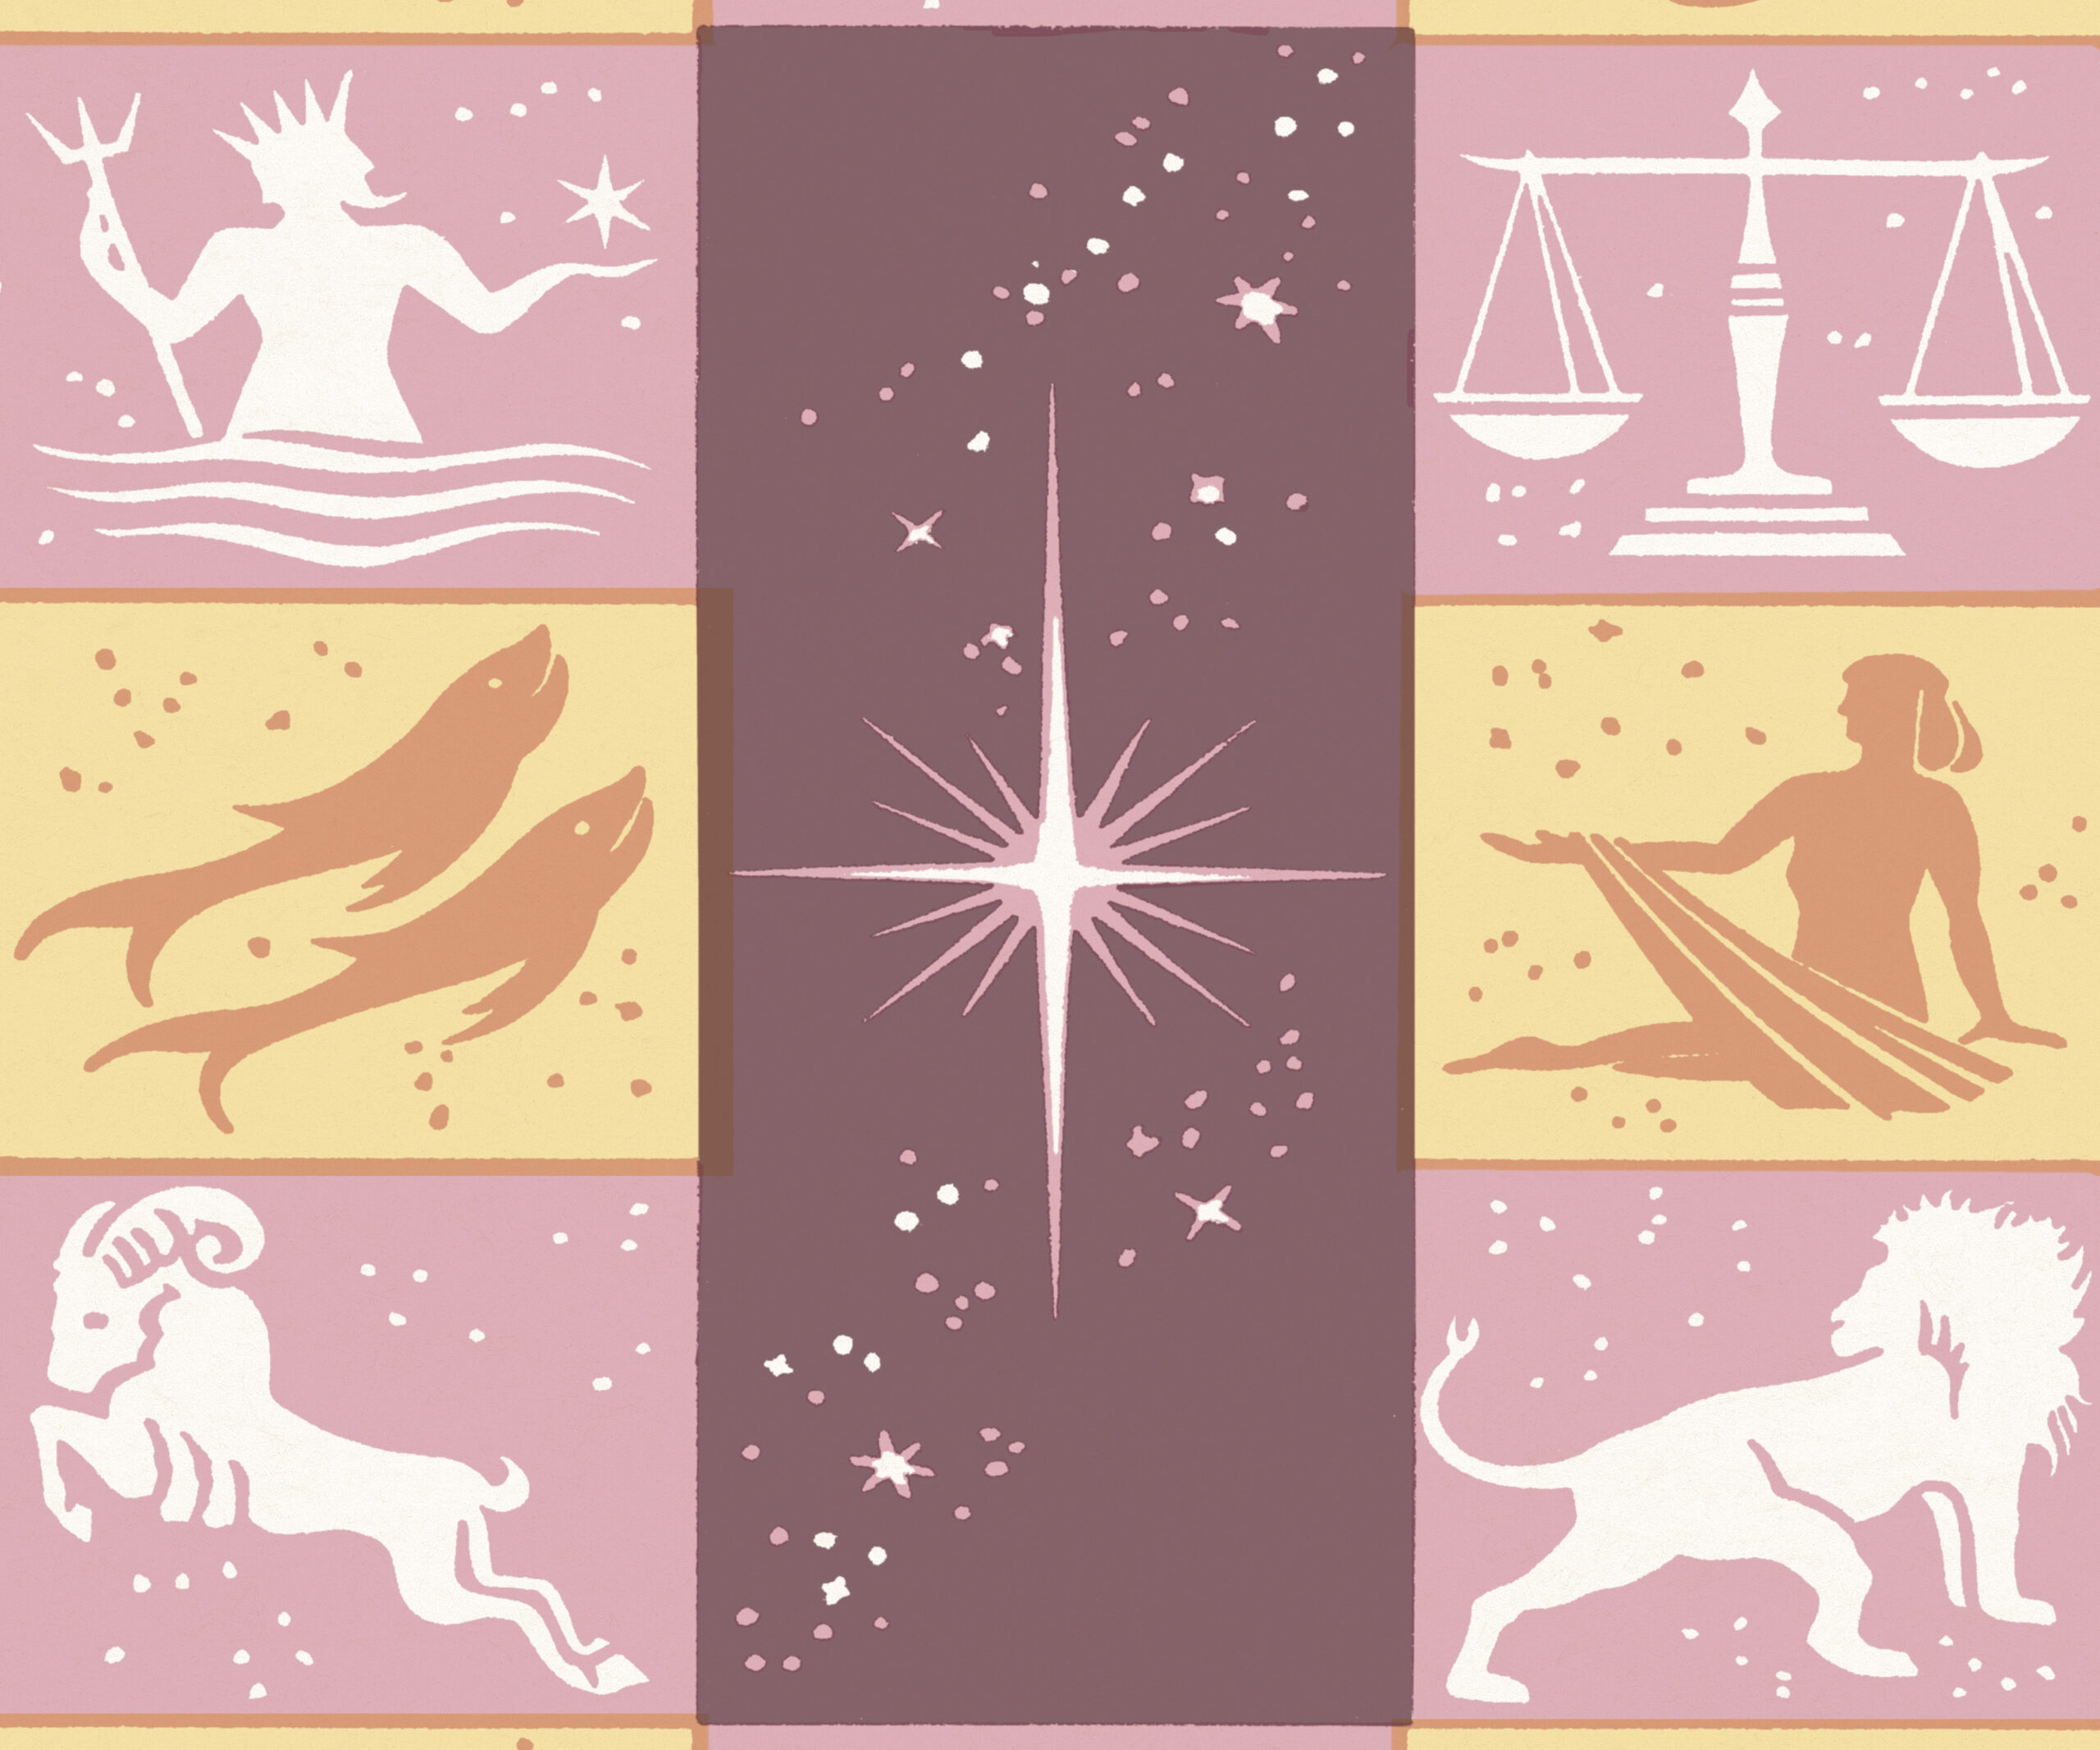 The 5 most common questions astrologers get asked